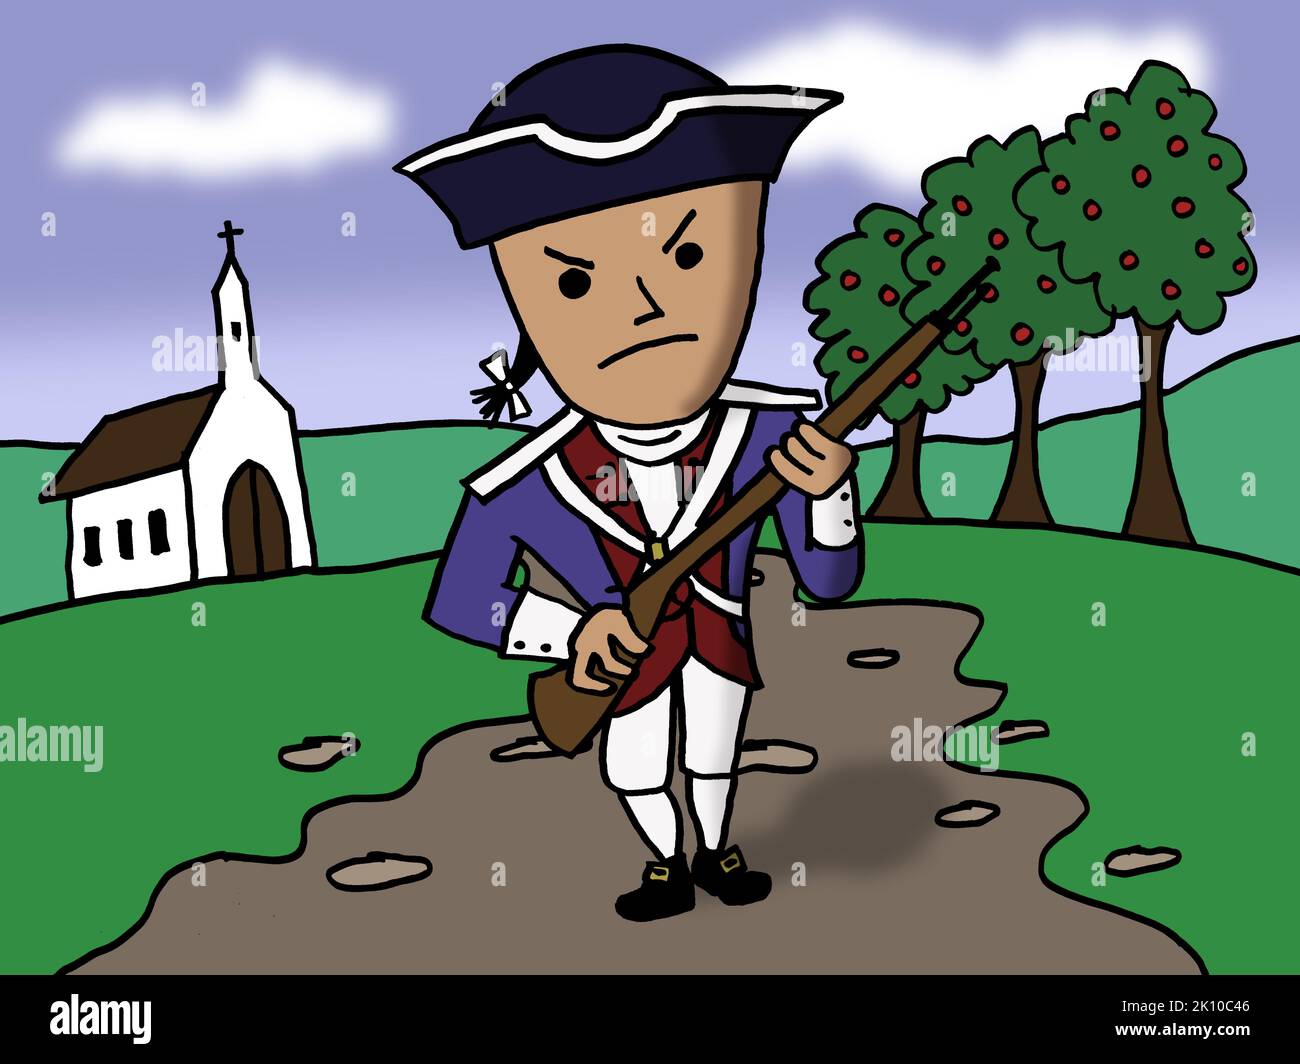 Cartoon of a minuteman soldier, from the American Revolutionary War, on guard to defend the country. Stock Photo